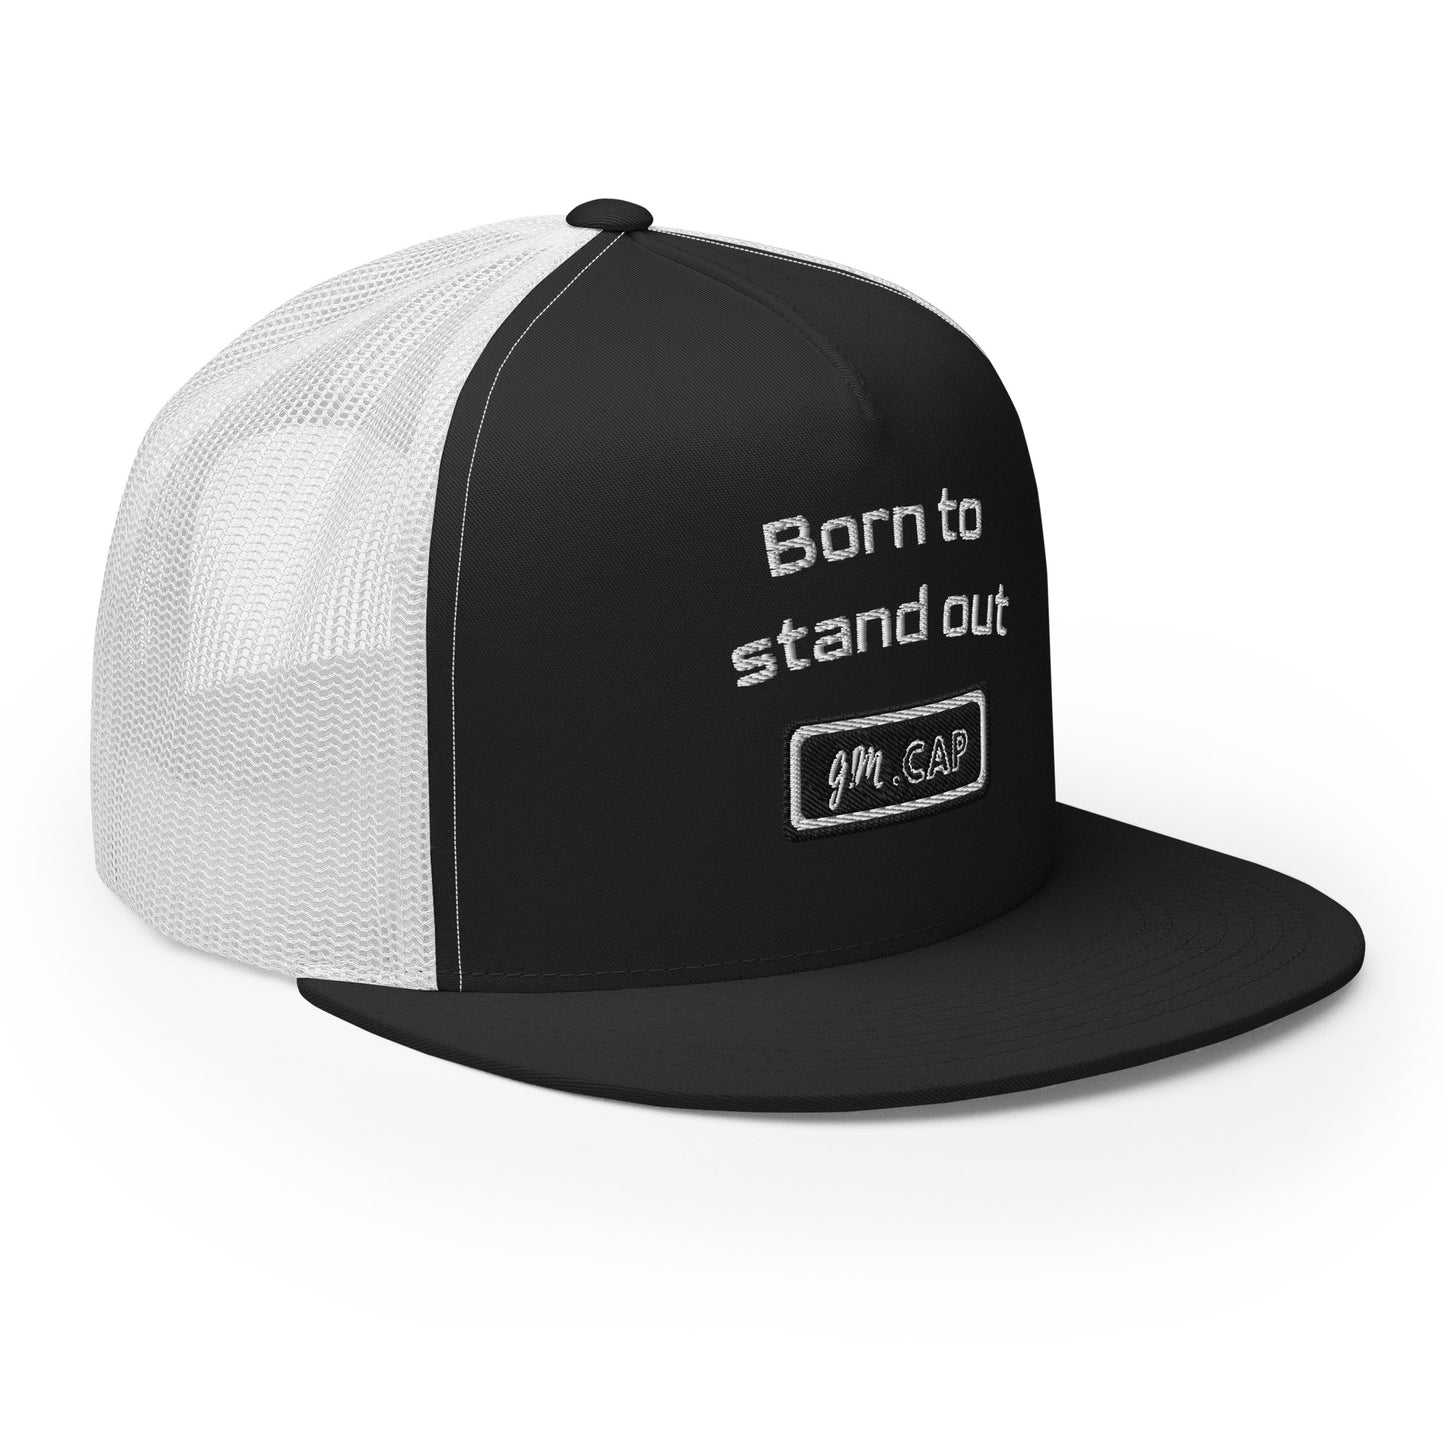 Born to stand out - Trucker